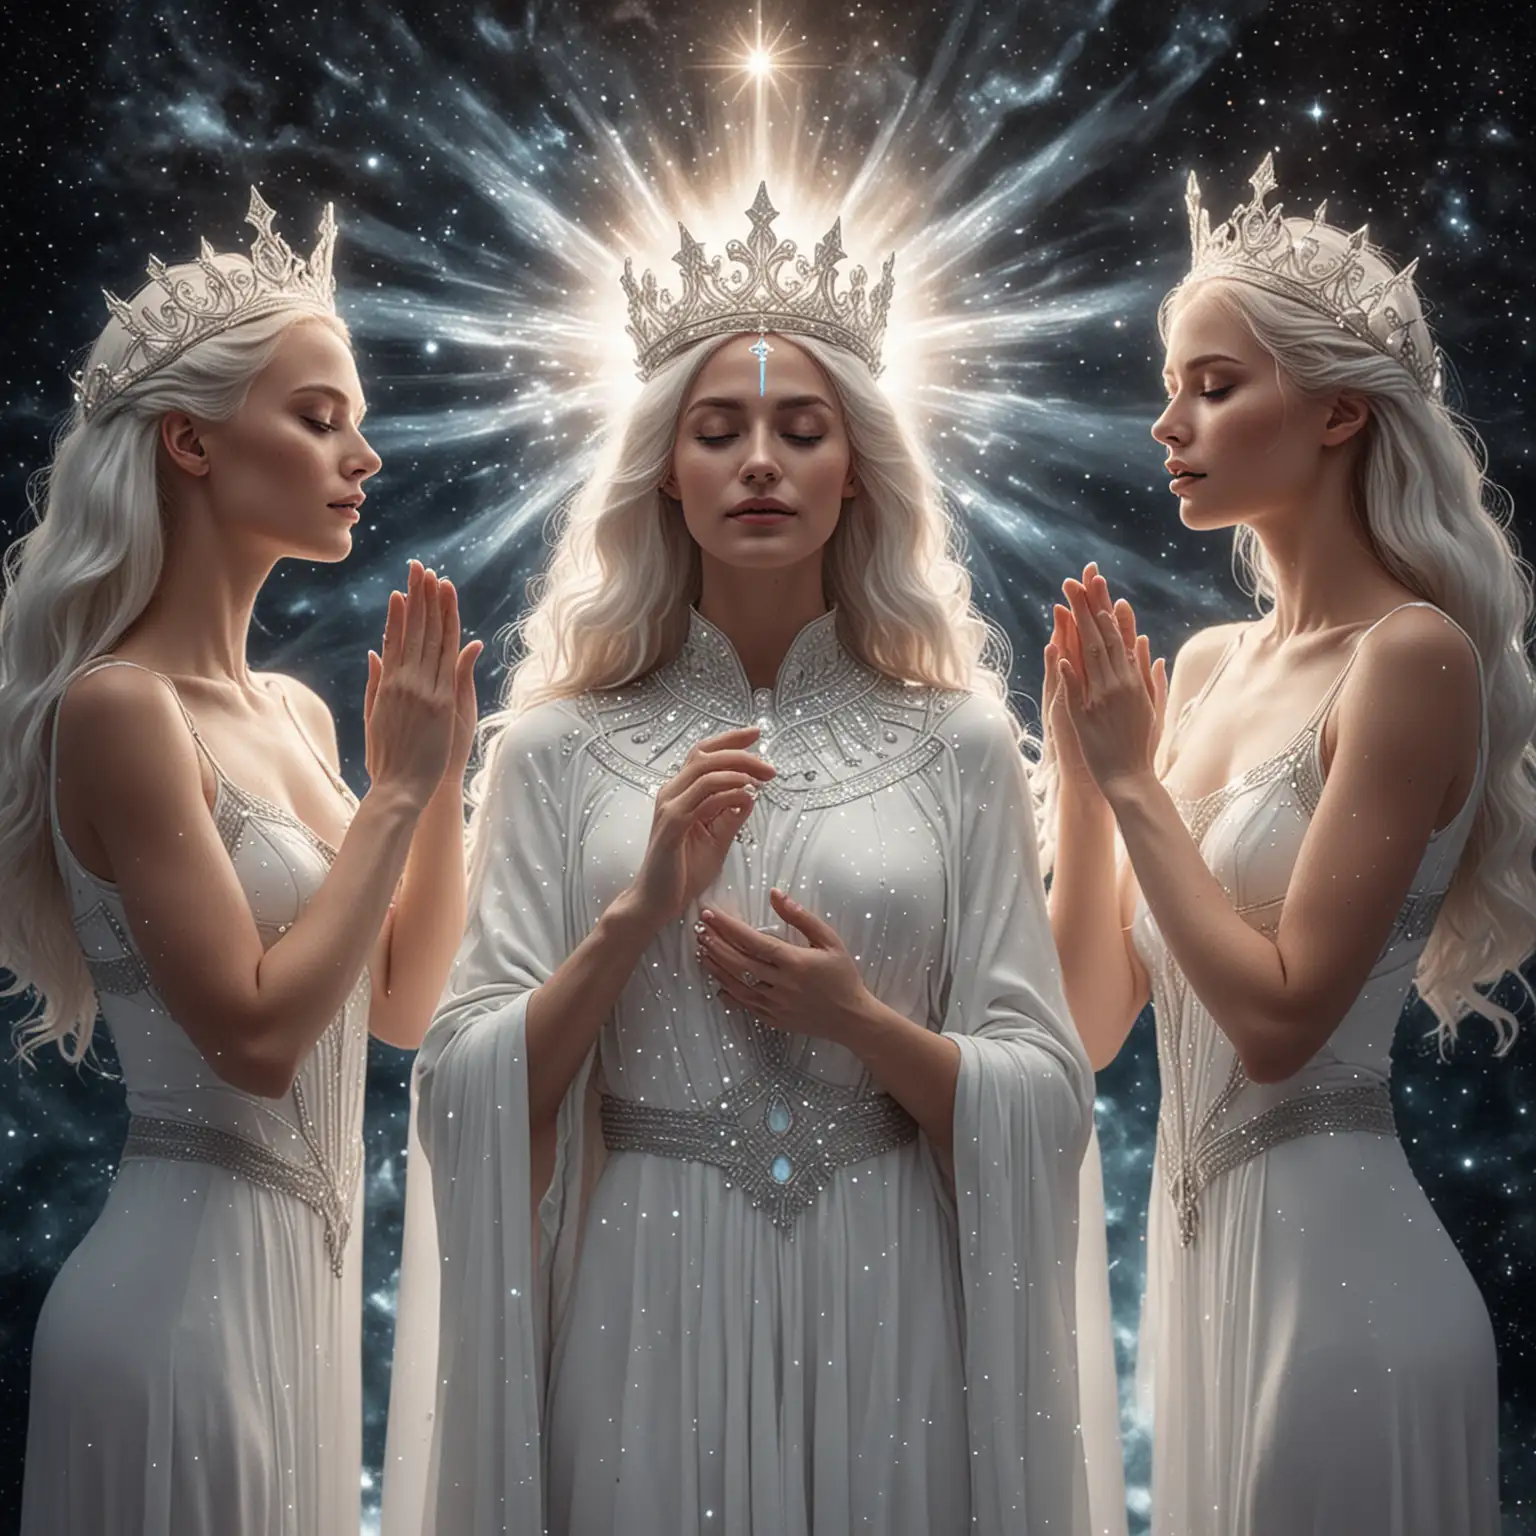 Three white galactic beings placing a crown on a woman dressed in glowing white with a celestial background.